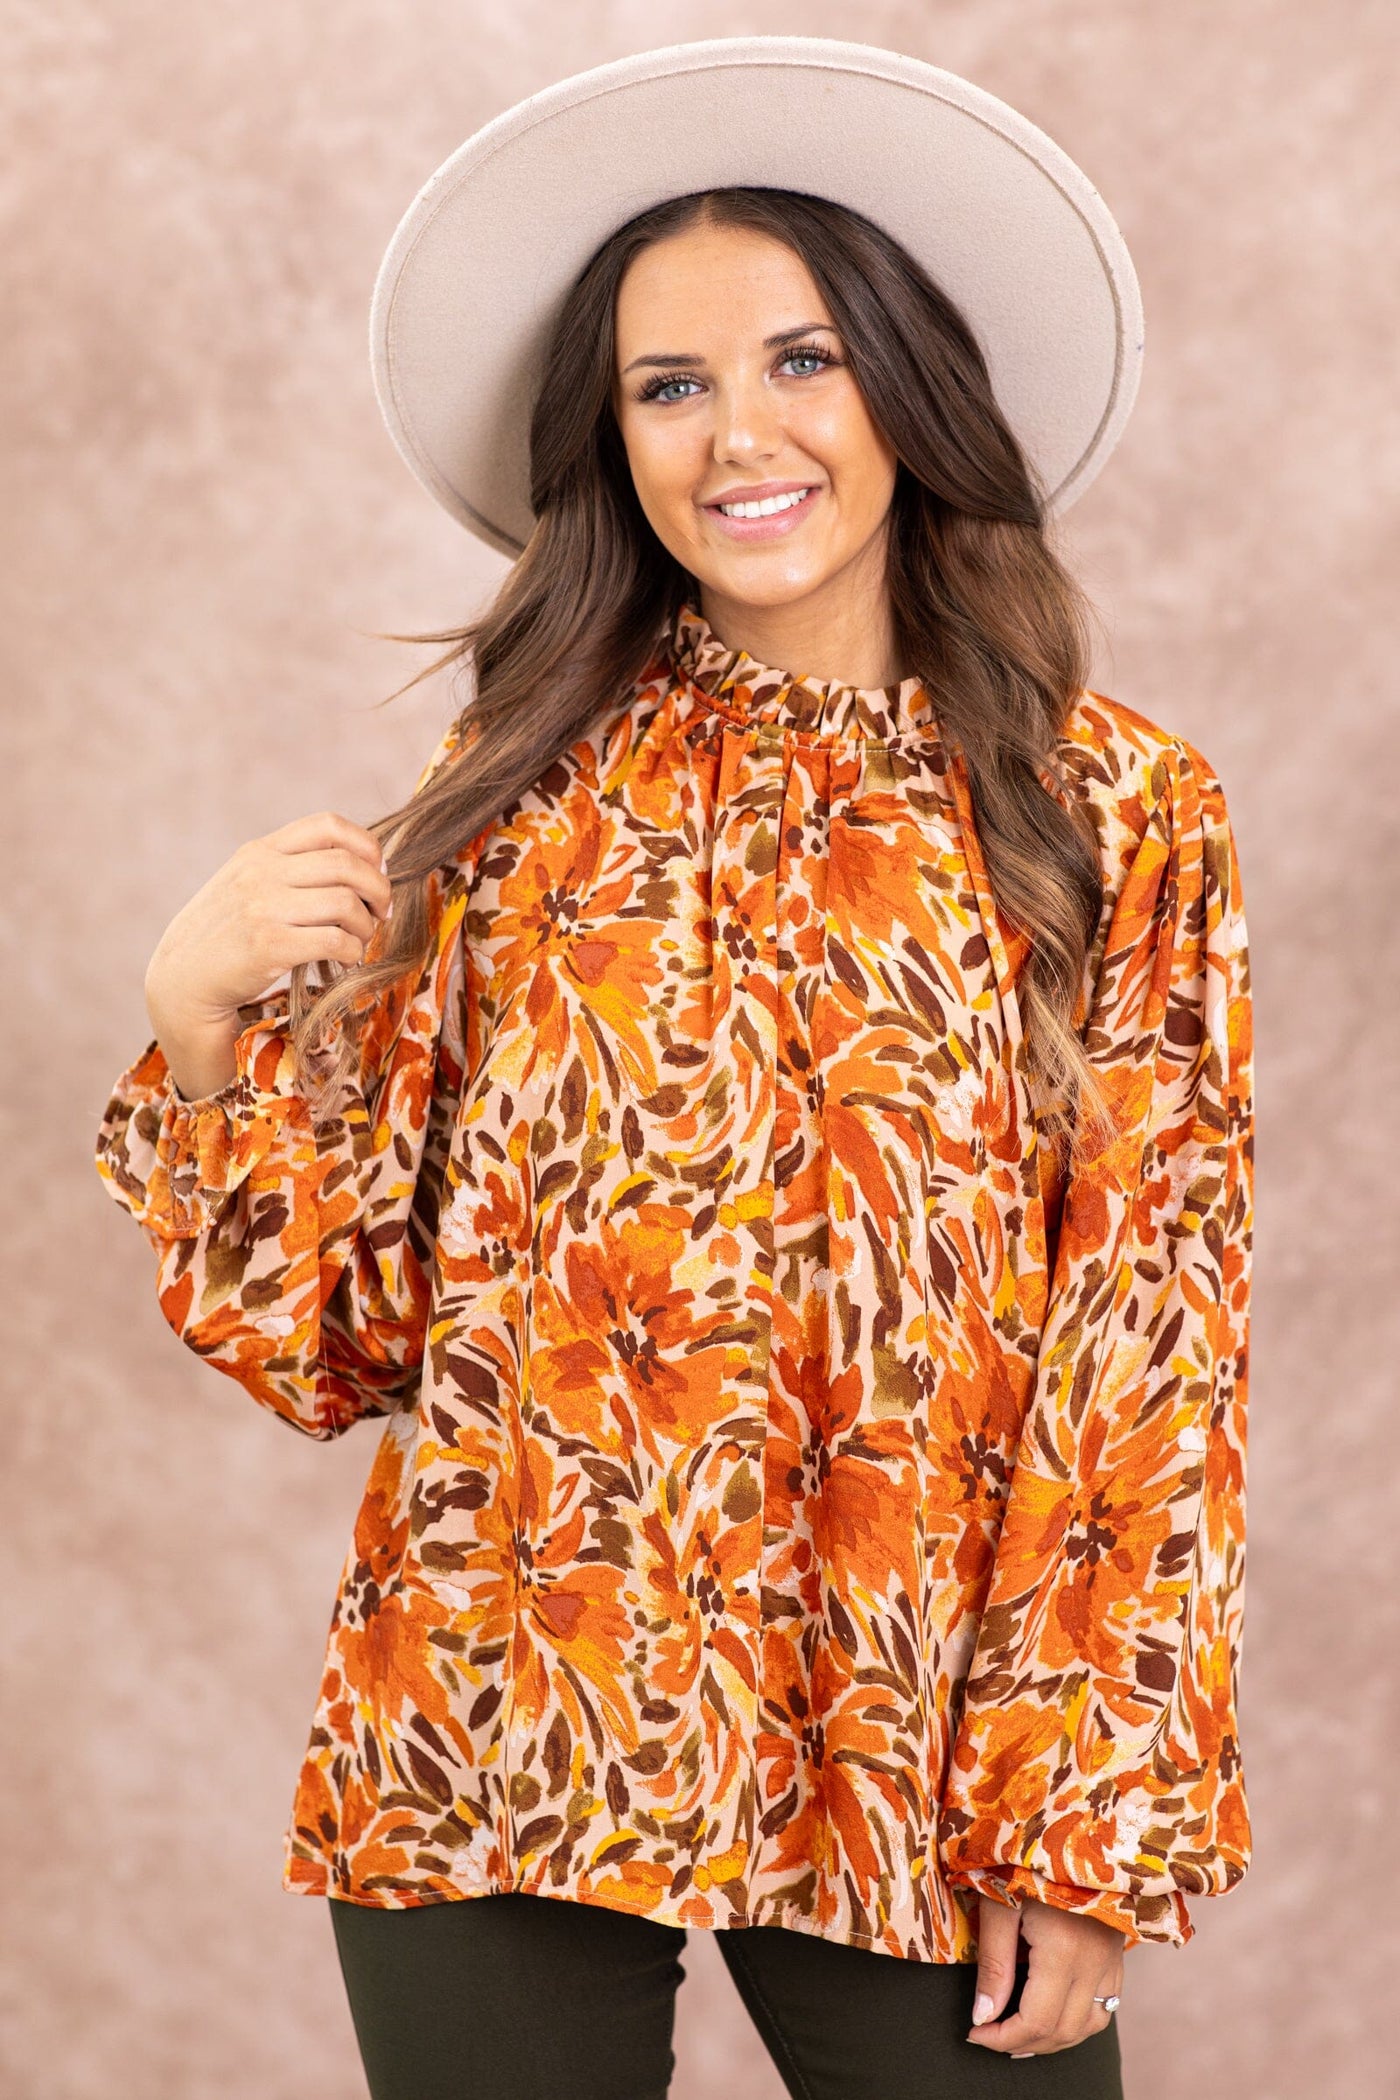 Orange and Tan Floral Print Smocked Cuff Top - Filly Flair